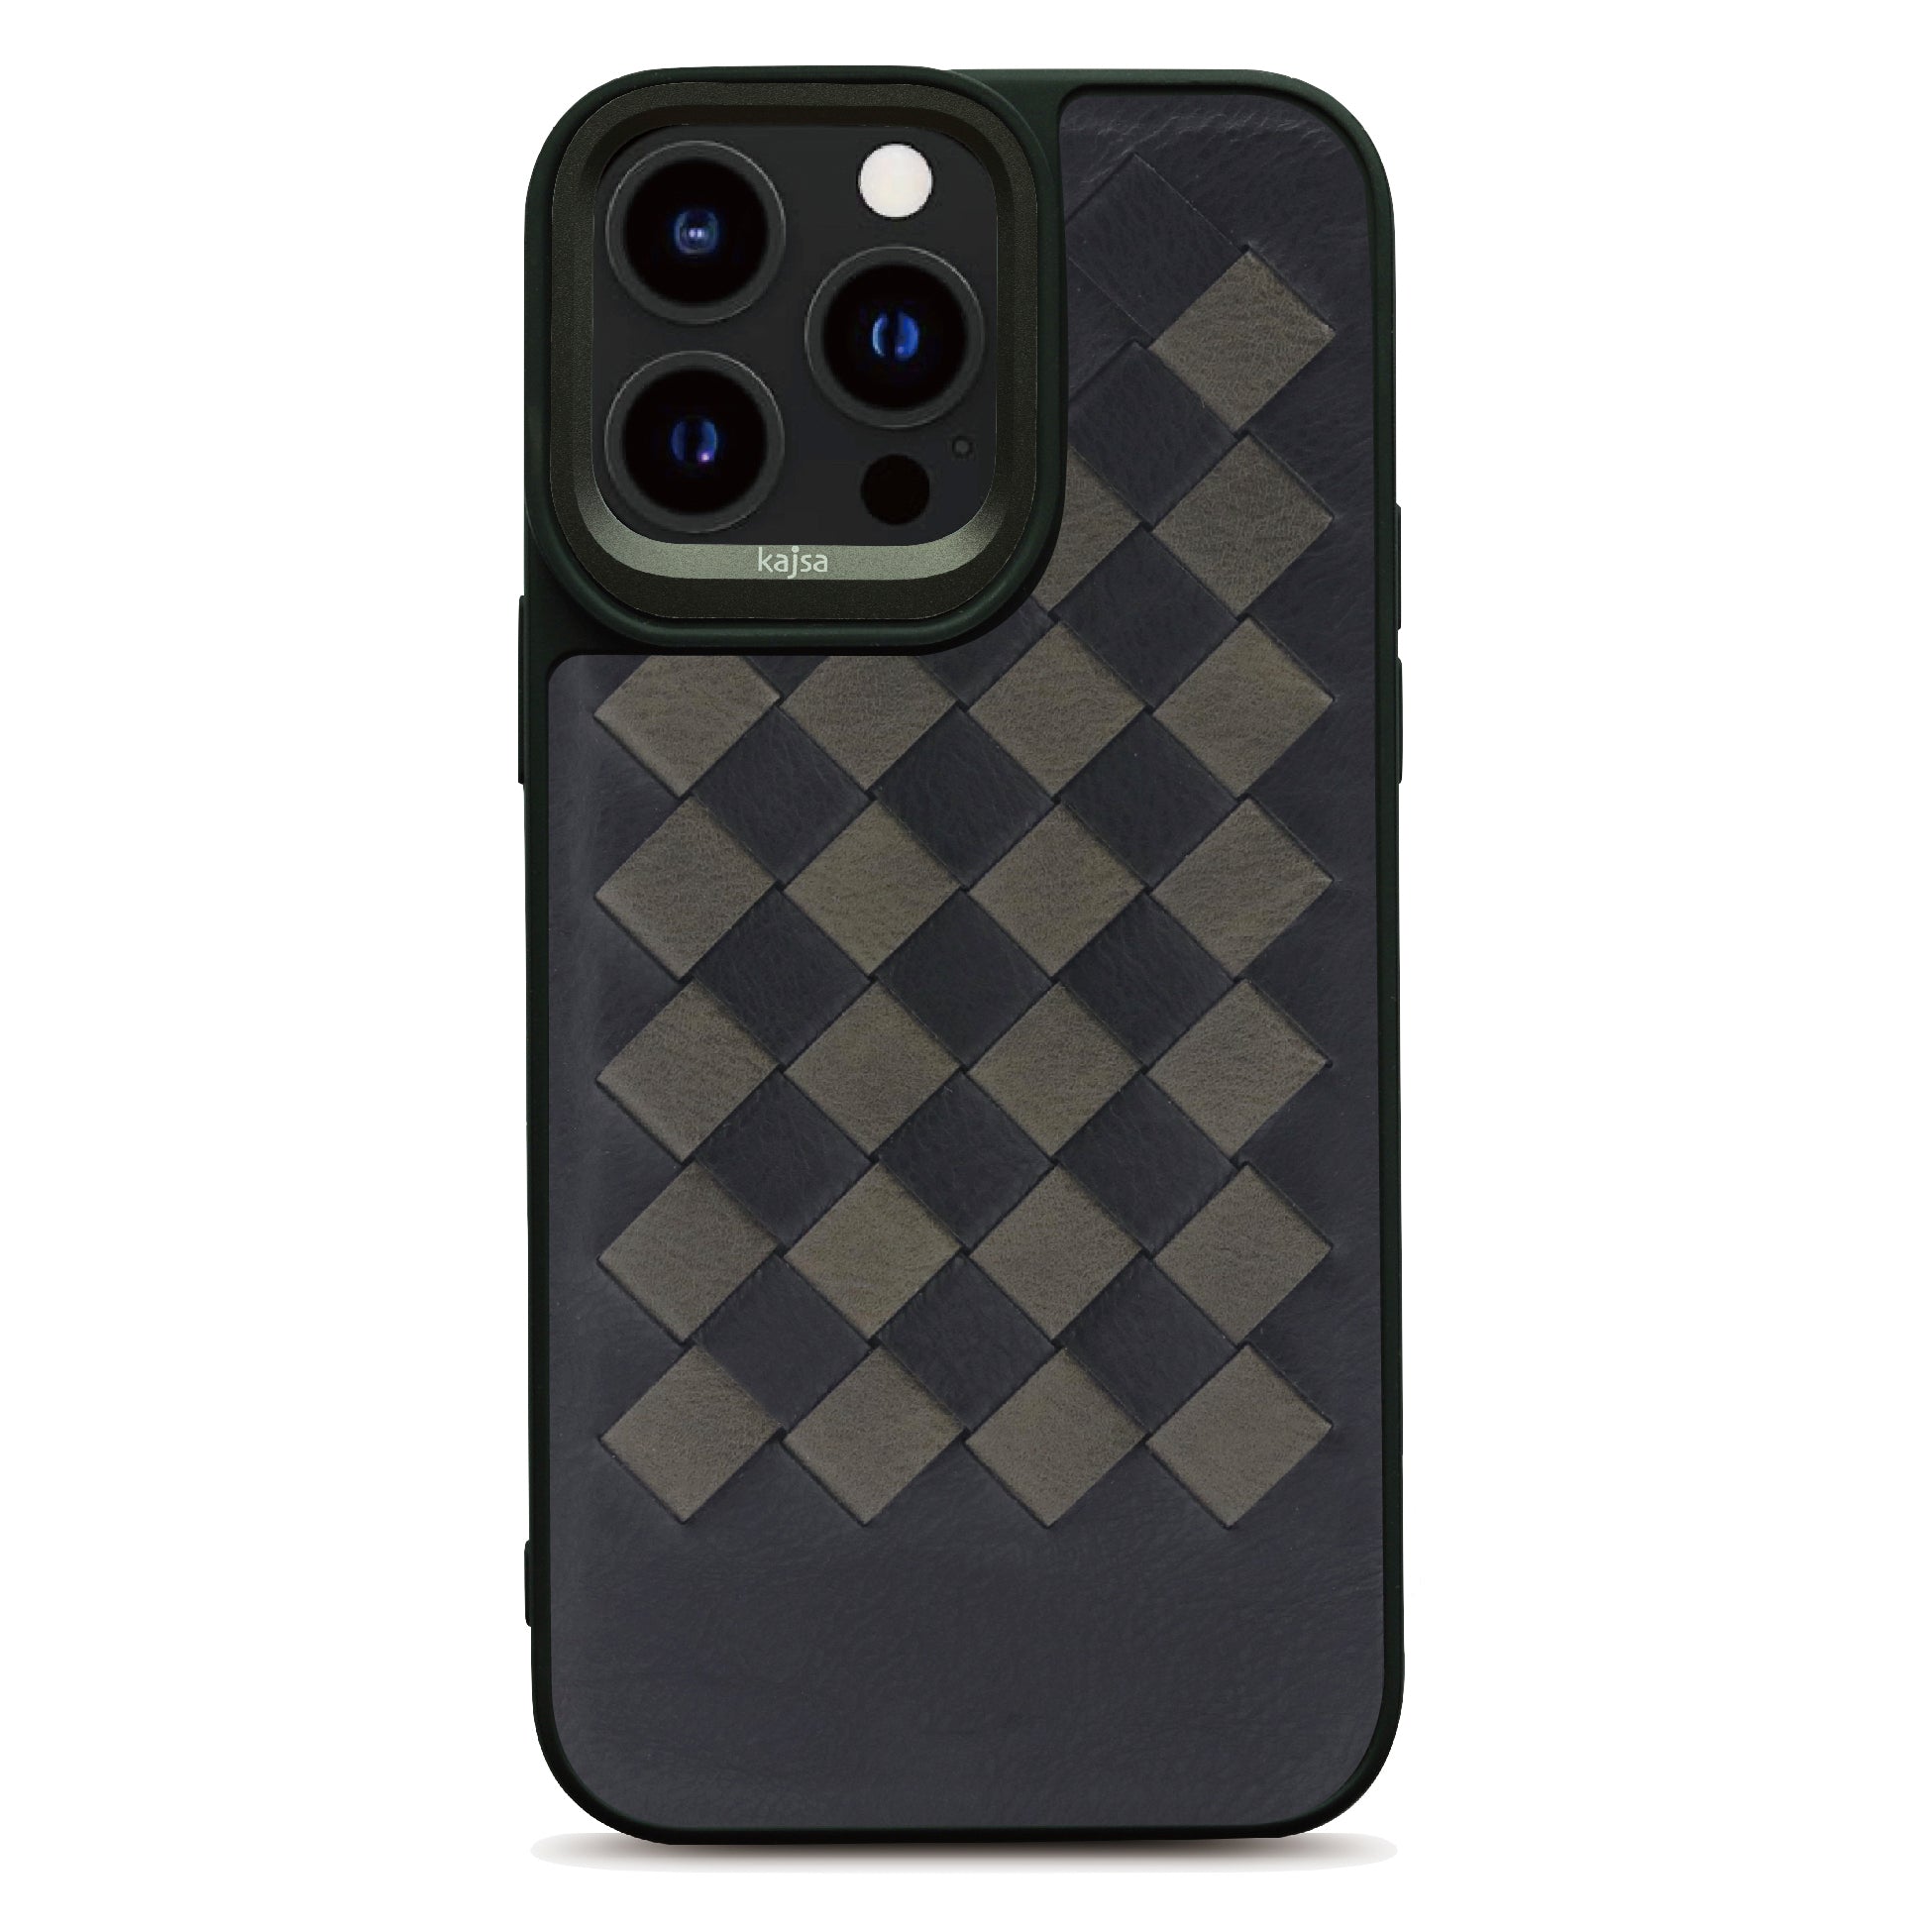 Preppie Collection - Dice Woven Back Case for iPhone 14-Phone Case- phone case - phone cases- phone cover- iphone cover- iphone case- iphone cases- leather case- leather cases- DIYCASE - custom case - leather cover - hand strap case - croco pattern case - snake pattern case - carbon fiber phone case - phone case brand - unique phone case - high quality - phone case brand - protective case - buy phone case hong kong - online buy phone case - iphone‎手機殼 - 客製化手機殼 - samsung ‎手機殼 - 香港手機殼 - 買電話殼